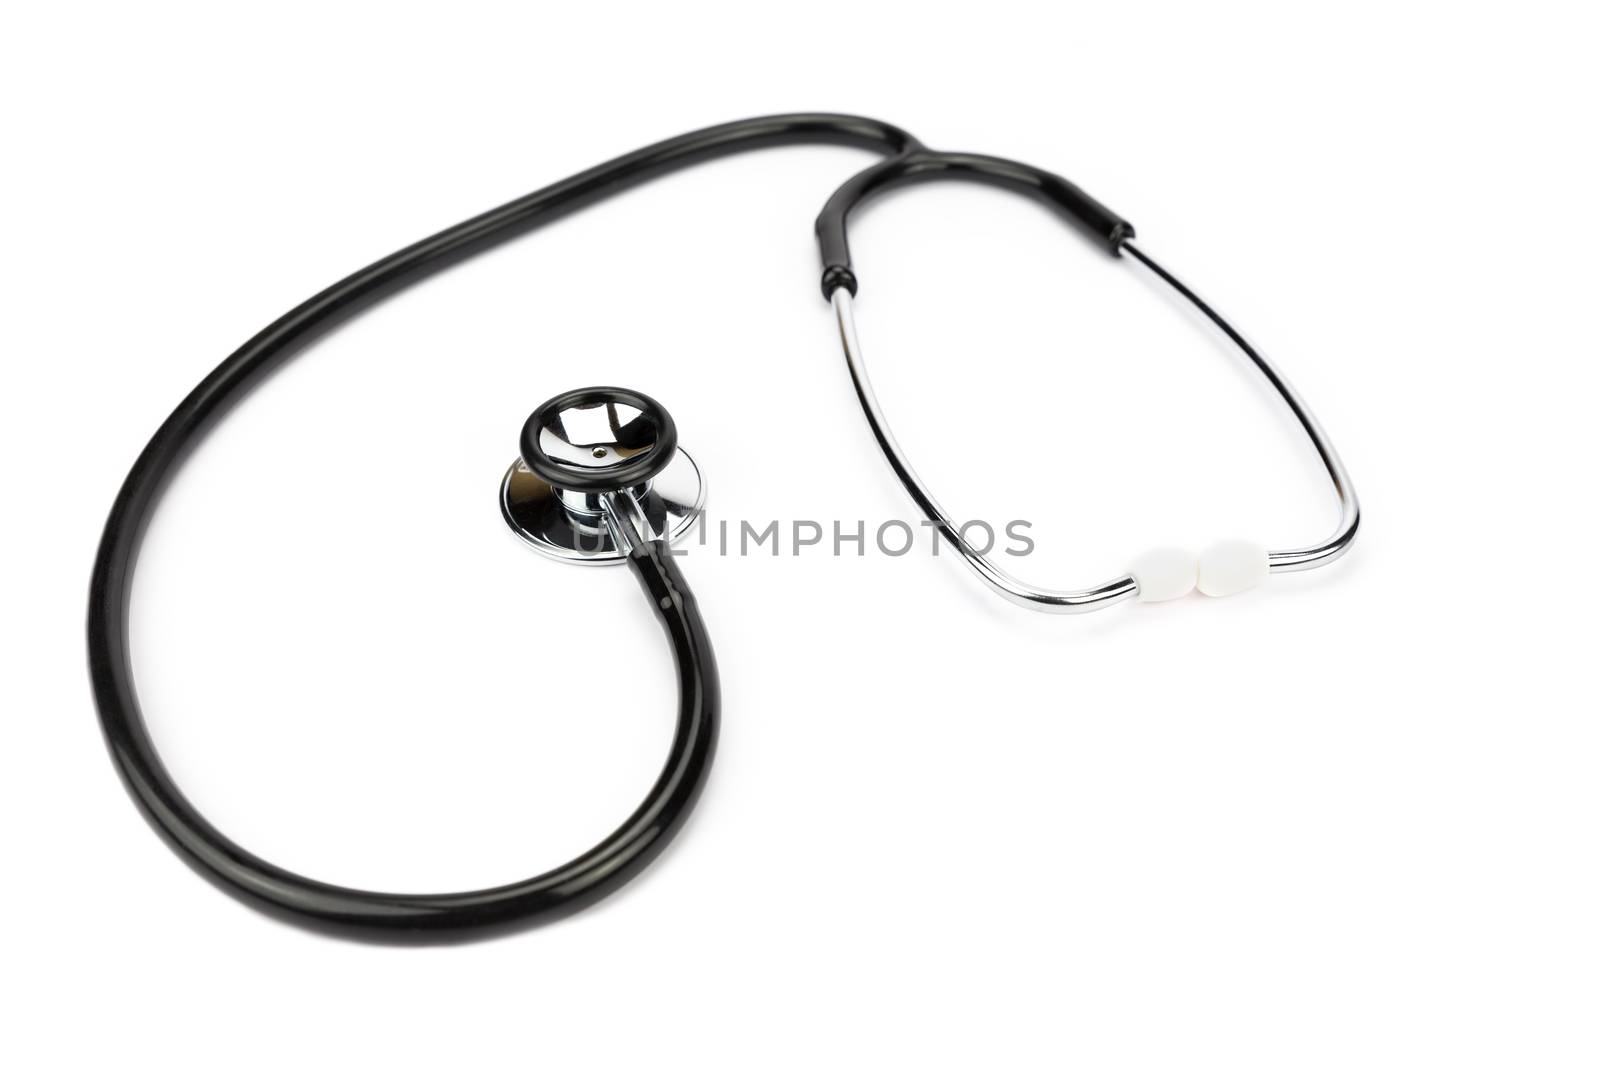 Black professional stethoscope isolated on white background by BenSchonewille